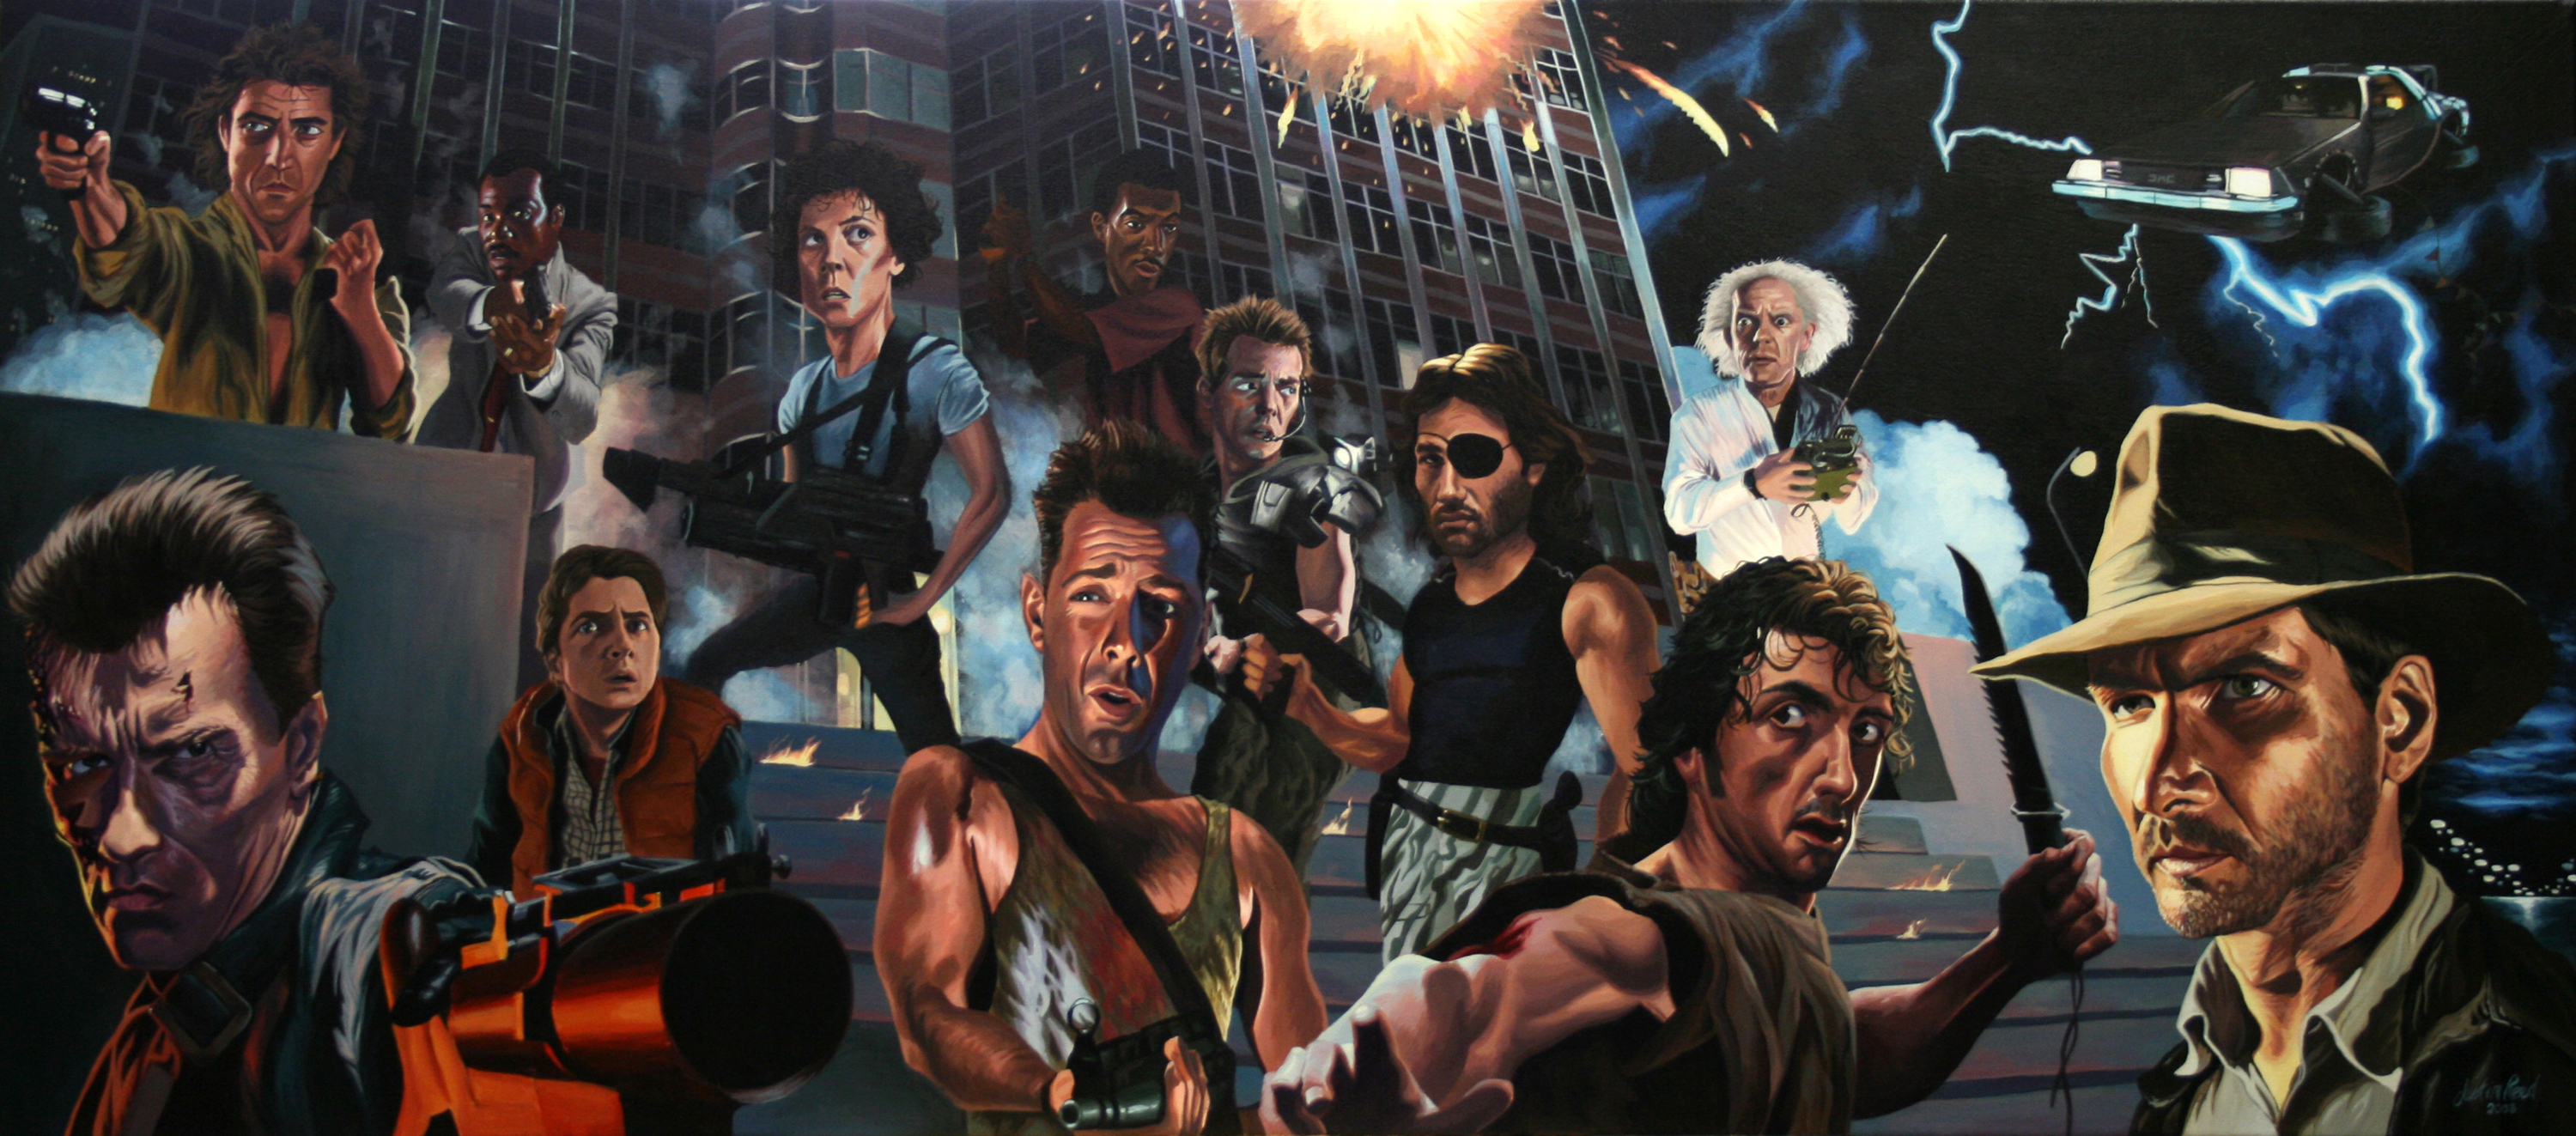 Imagination Die Hard Wallpaper And Image Pictures